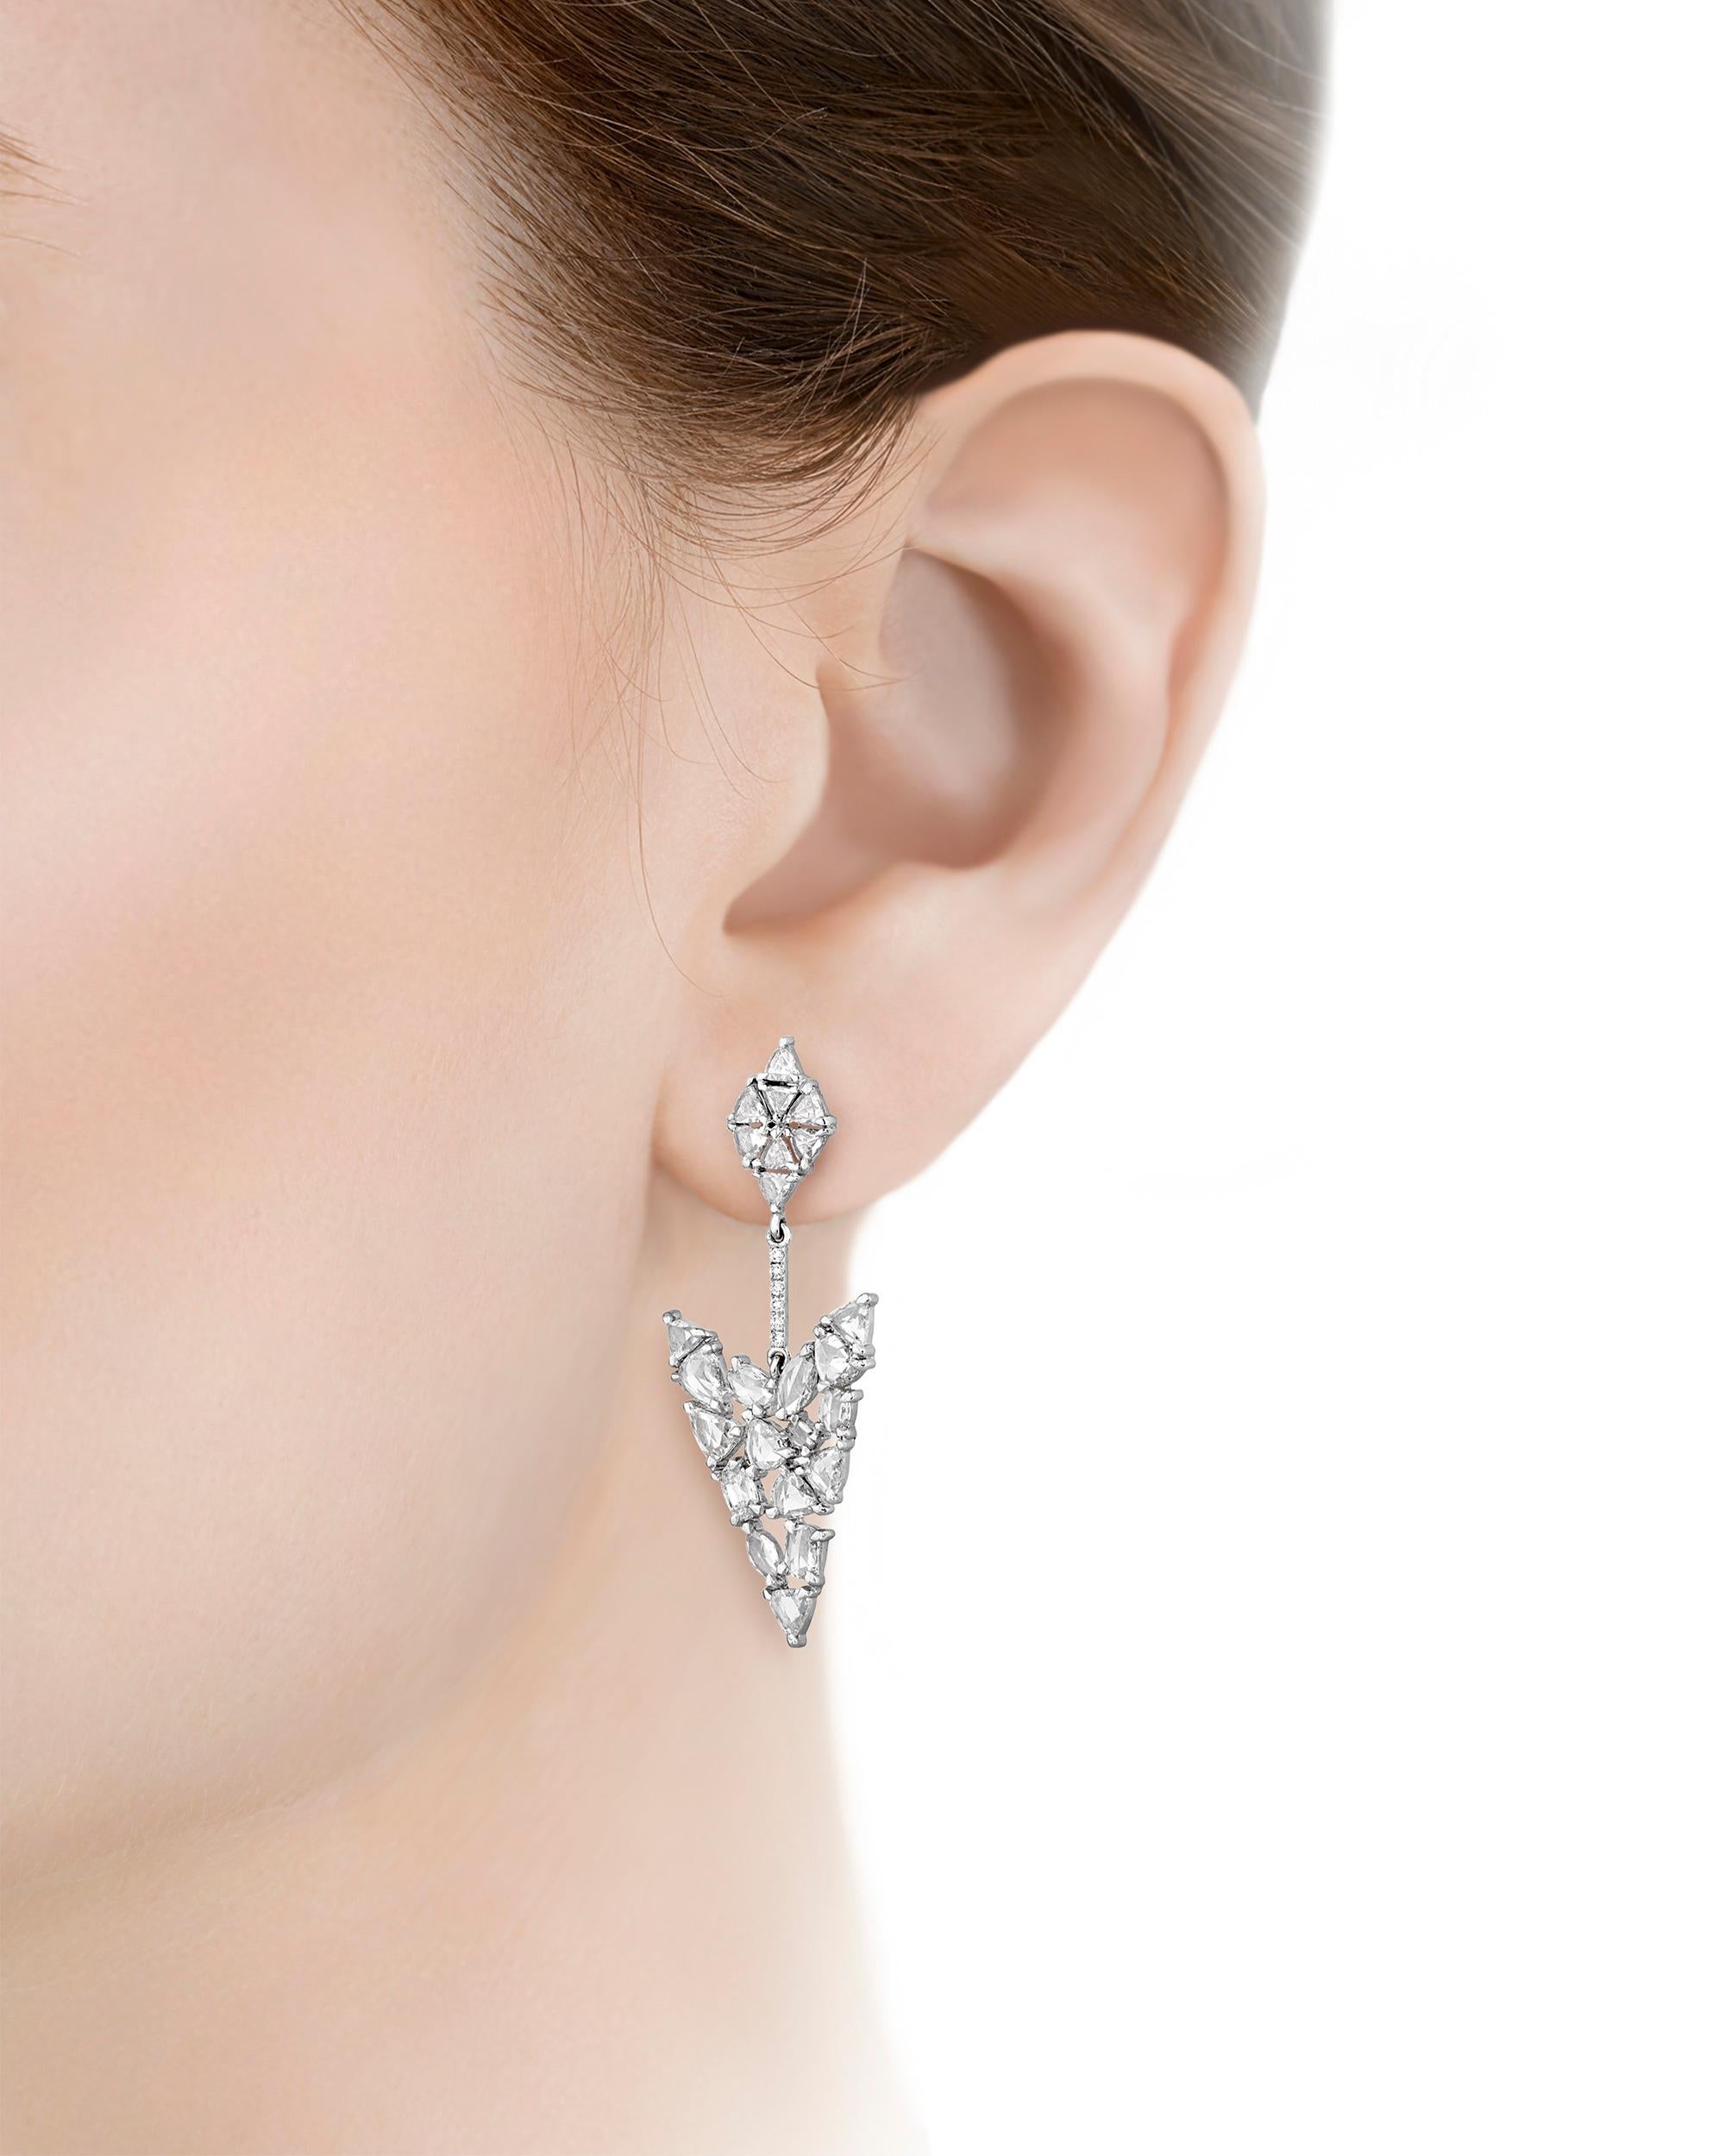 Dazzling rose-cut diamonds totaling 4.45 carats cover these dynamic arrow-shaped drop earrings. Set in 18K white gold and designed with meticulous attention to every detail, this elegant pair will glisten with every movement.

1 3/4